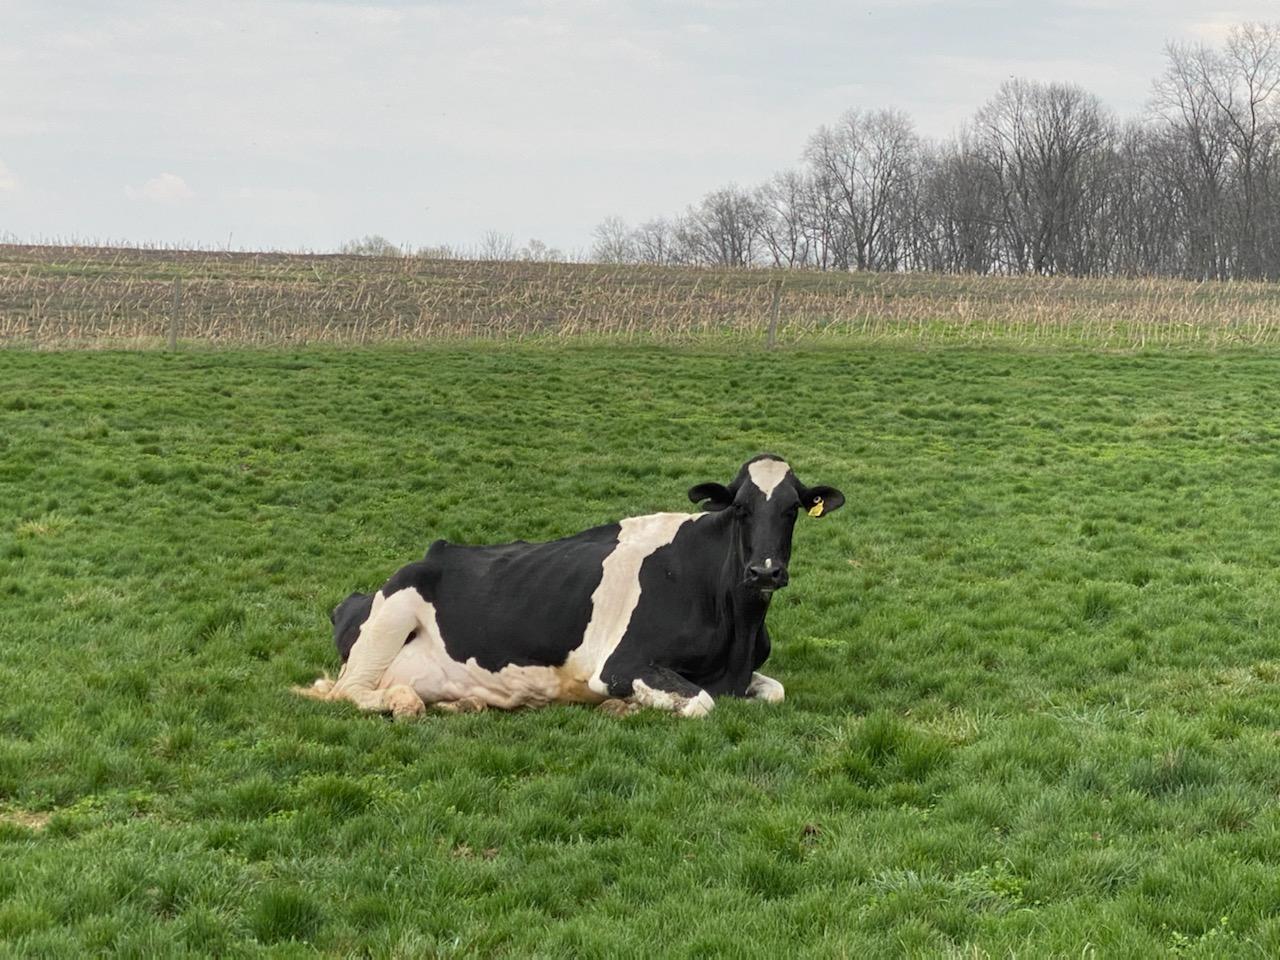 Cow laying down in a field